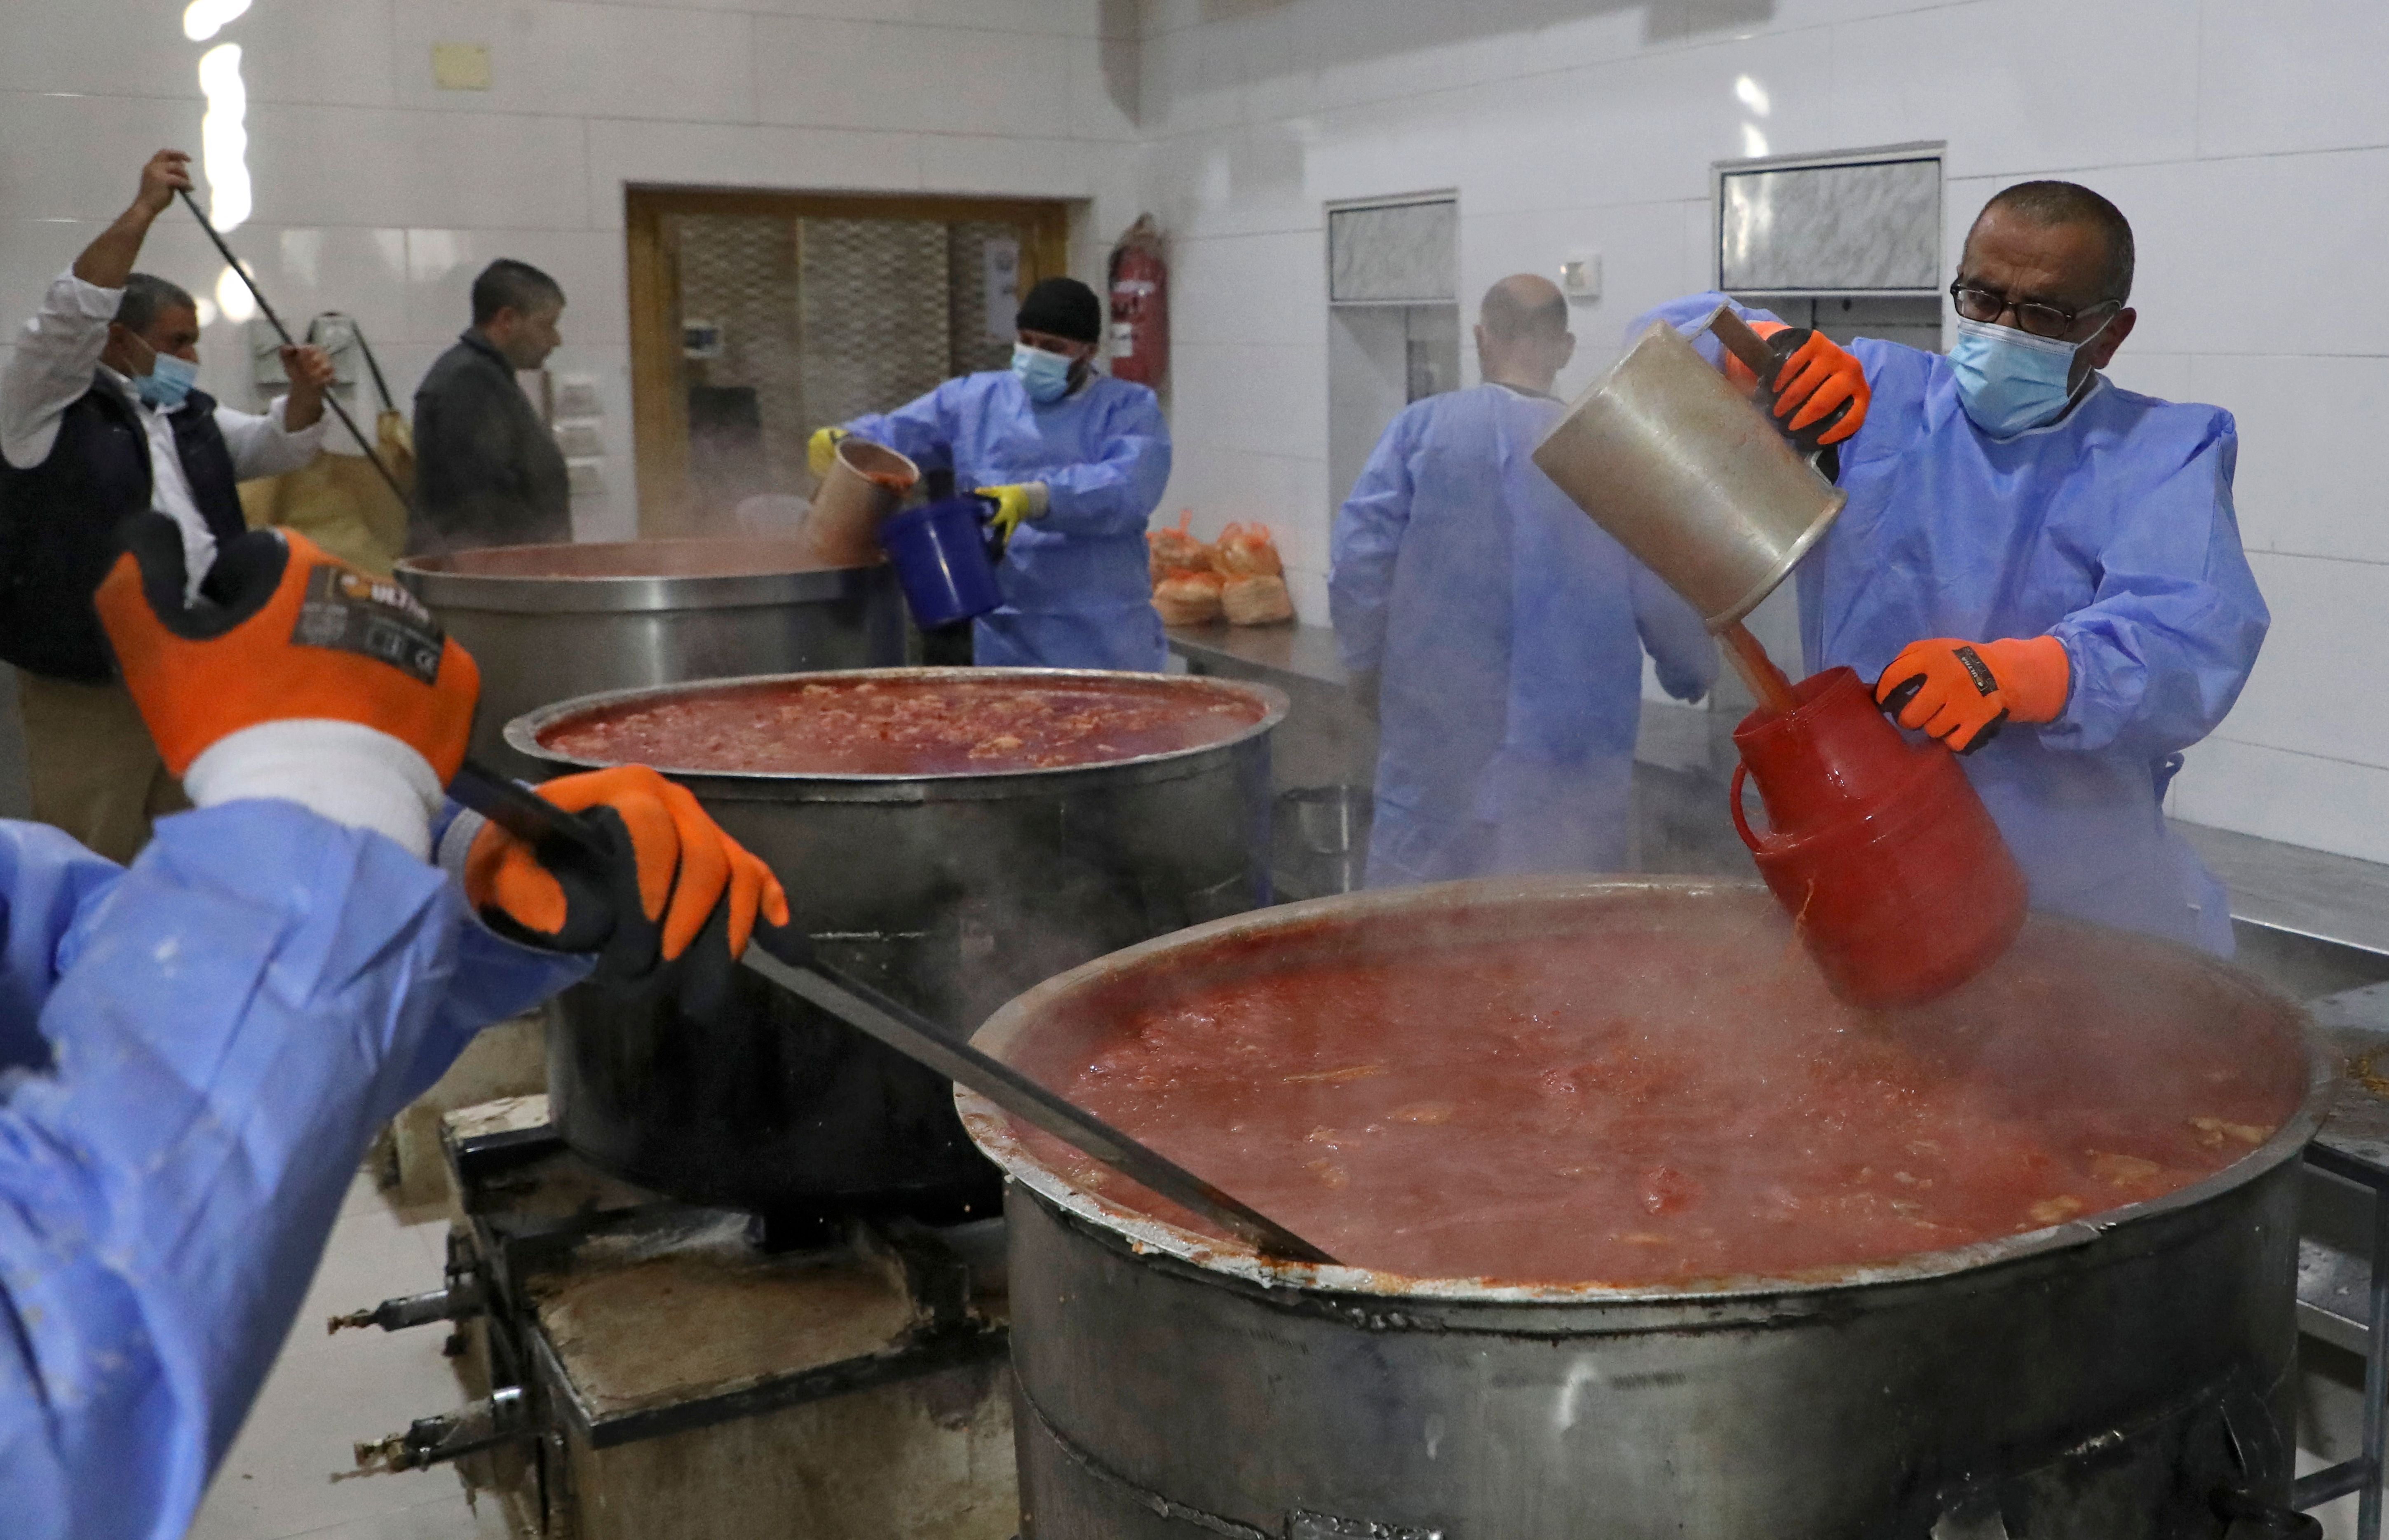 FILE photo: Workers prepare and serve soup for people in need at the Takeyat Ibrahim kitchen in Hebron's Old City in West Bank on 15 April, 2021